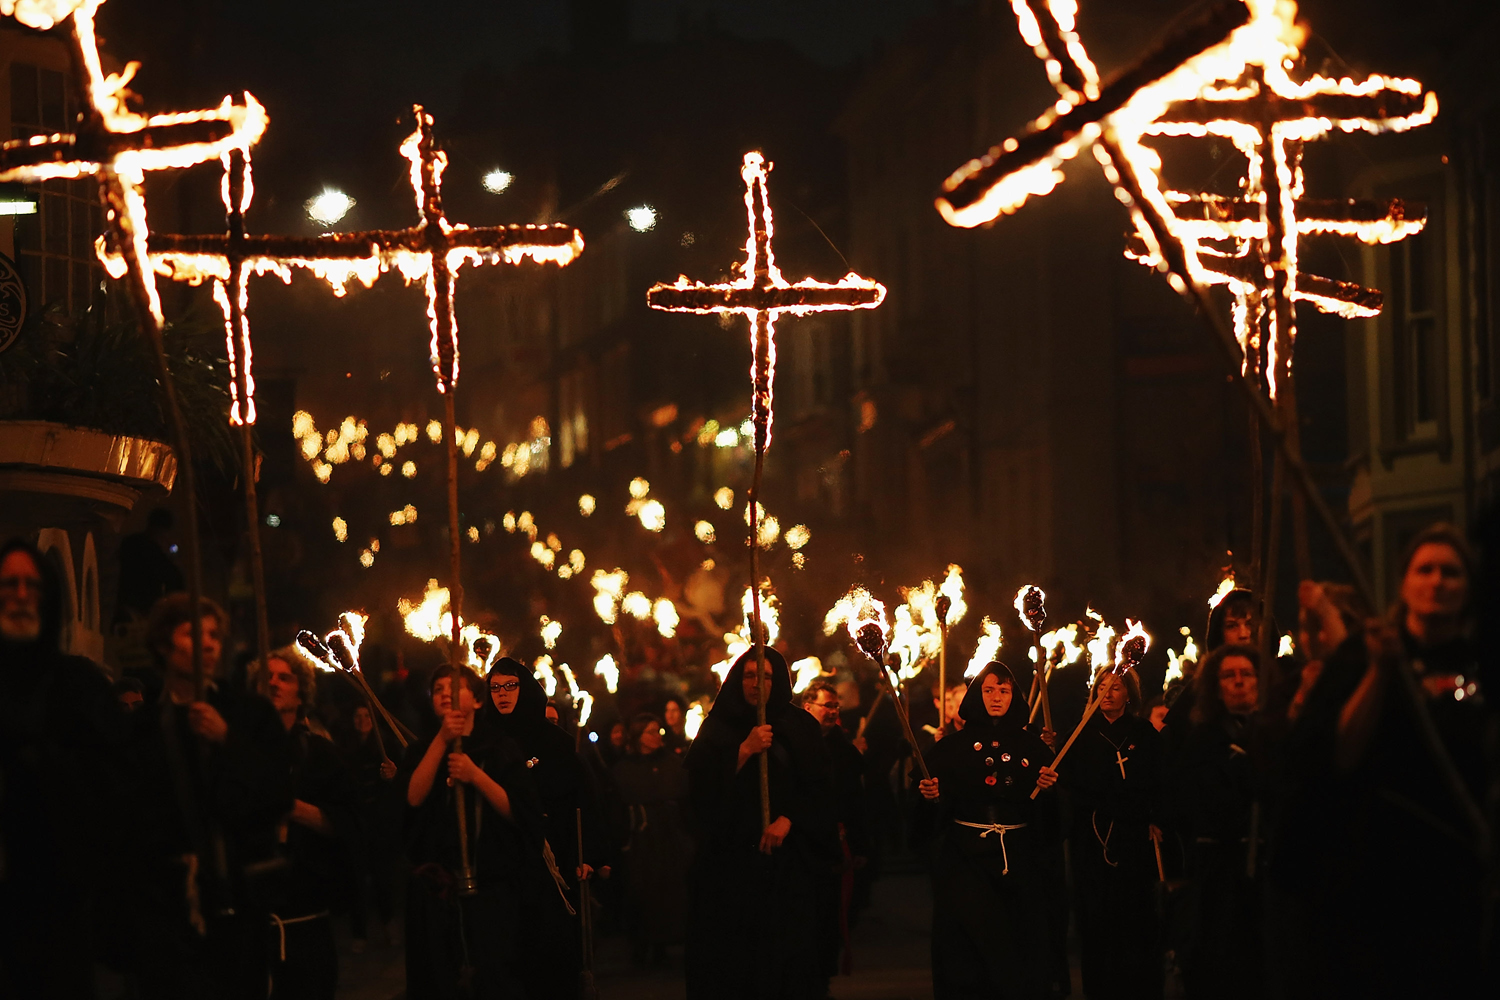 Image: Nov. 5, 2012. Revelers walk with burning crosses during the Bonfire Night celebrations in Lewes, Sussex in England. Bonfire Night is related to the ancient festival of Samhain, the Celtic New Year.